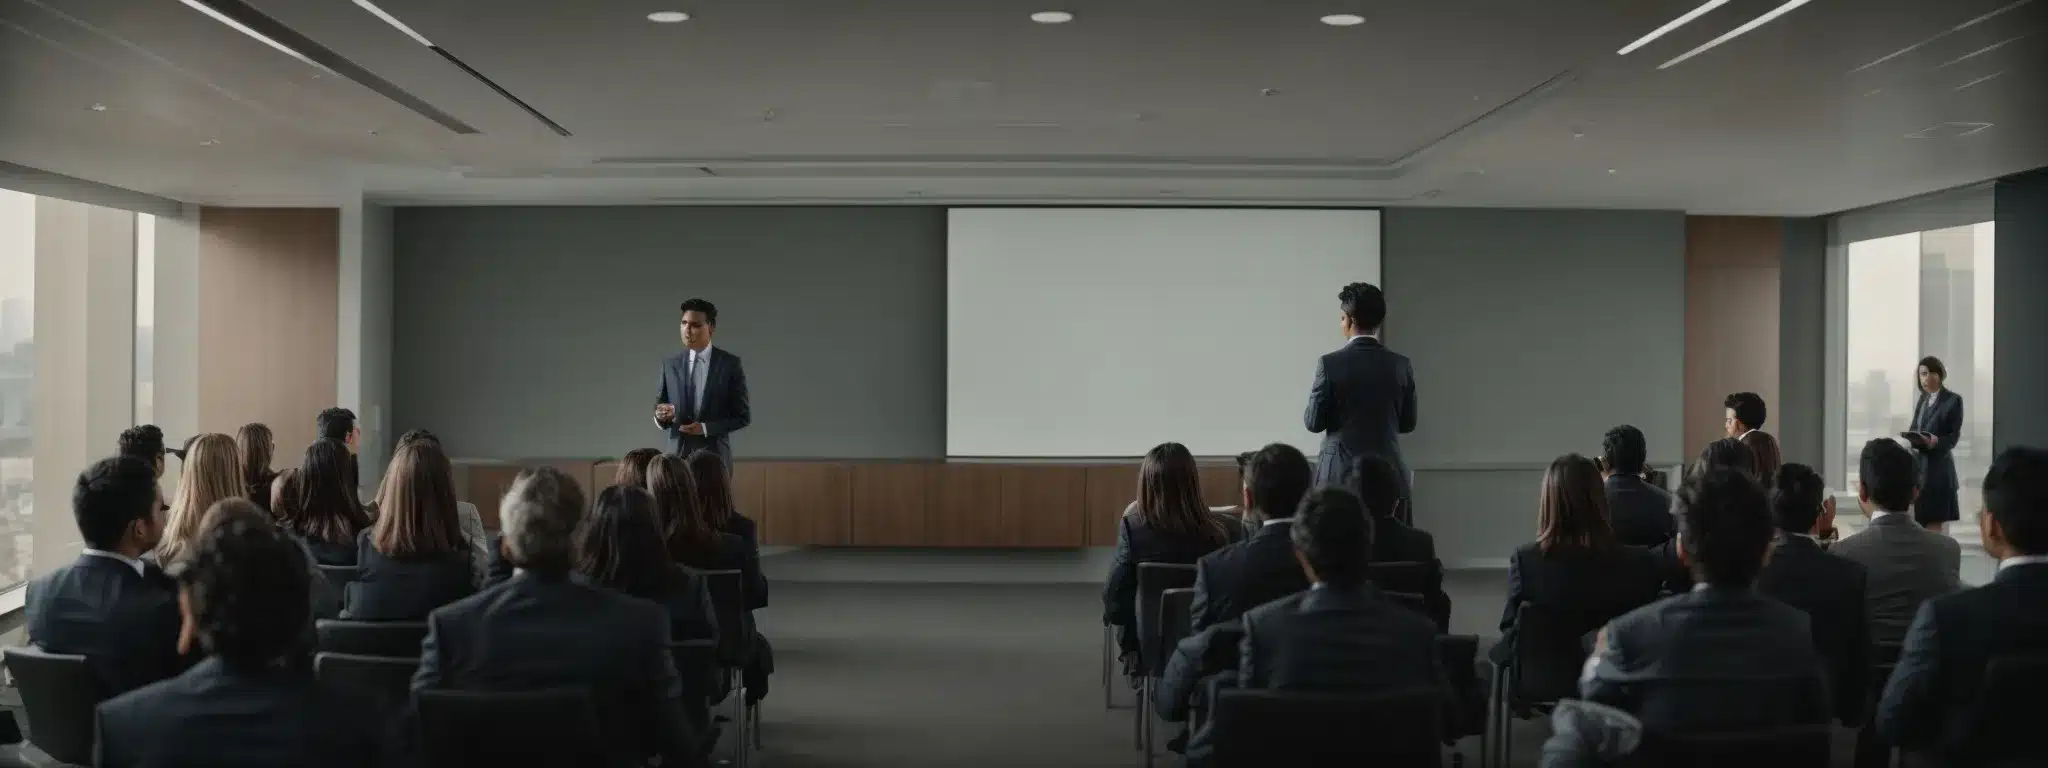 A Marketer Stands In A Conference Room, Engaging An Audience With A Presentation About Brand Positioning.